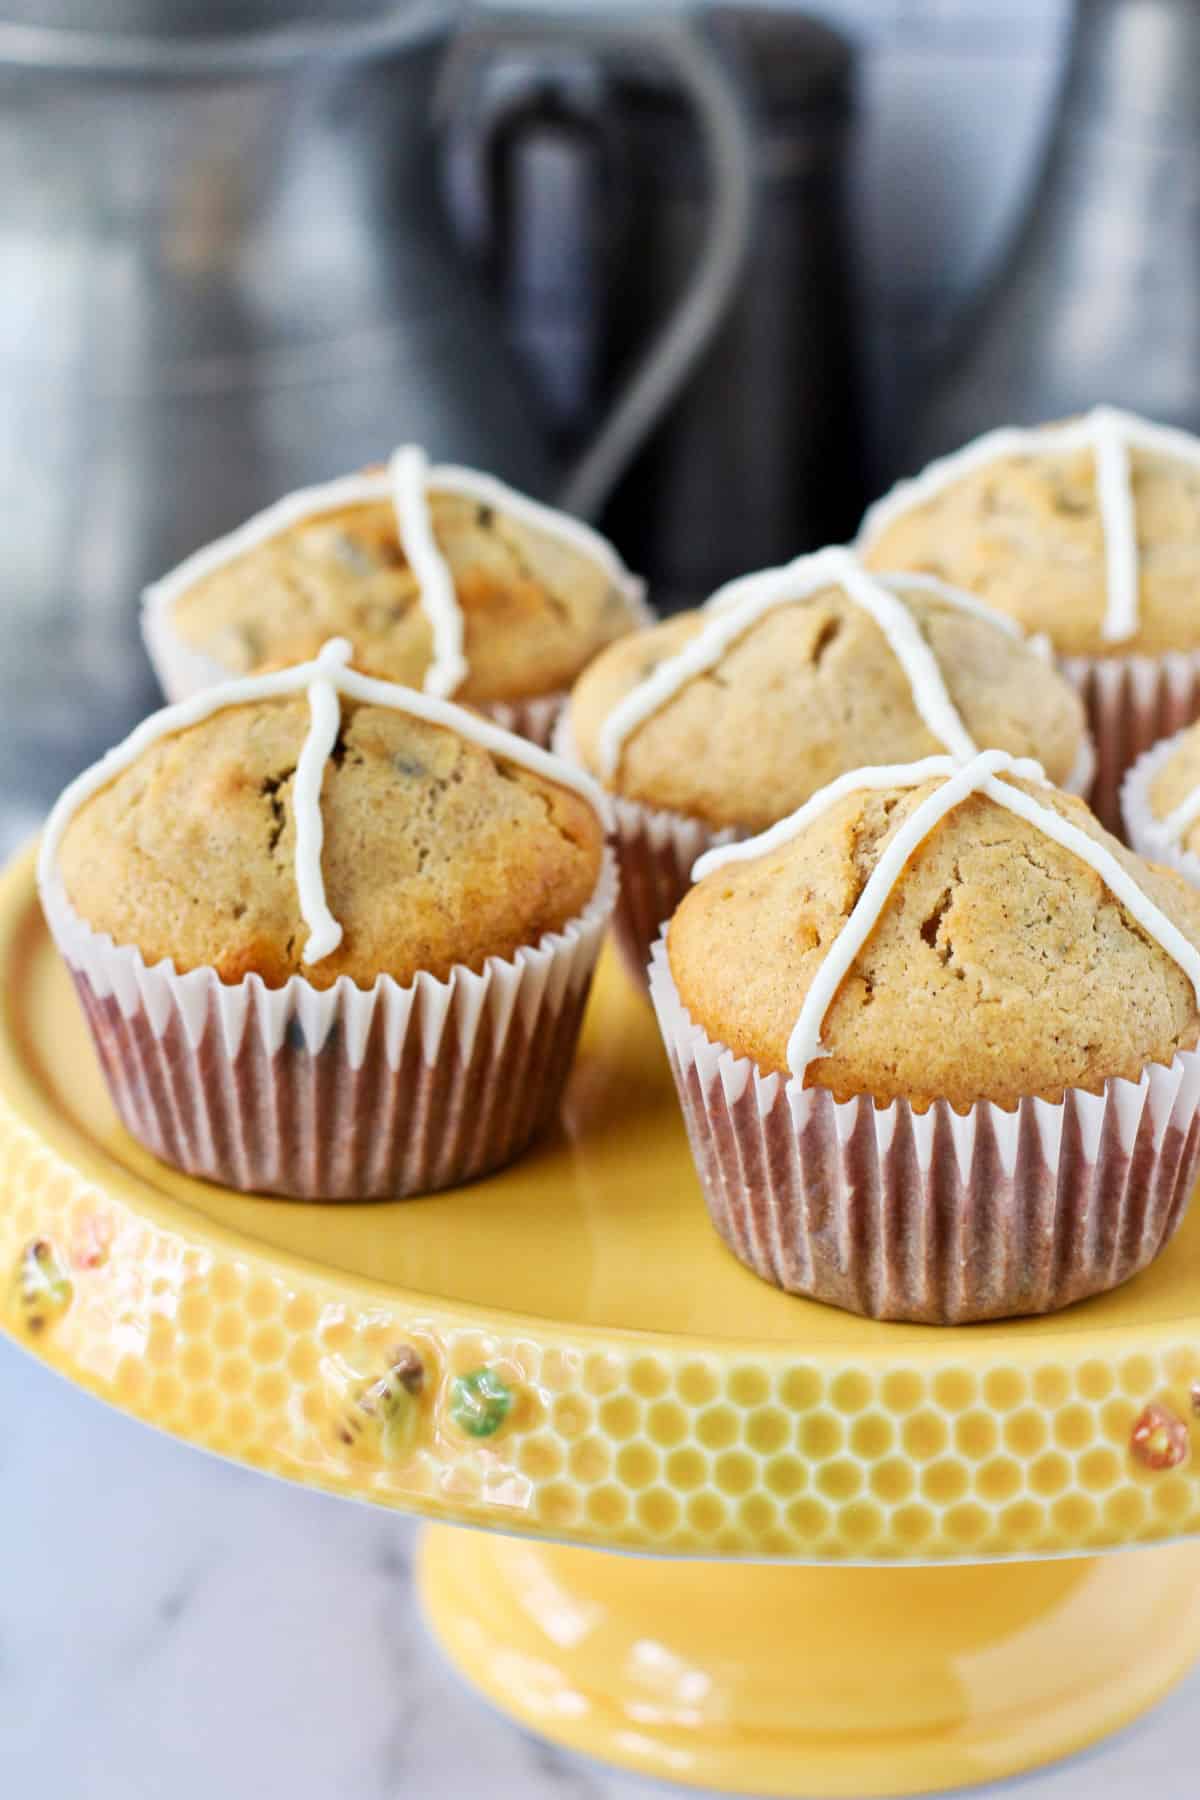 Muffins on a cake stand.